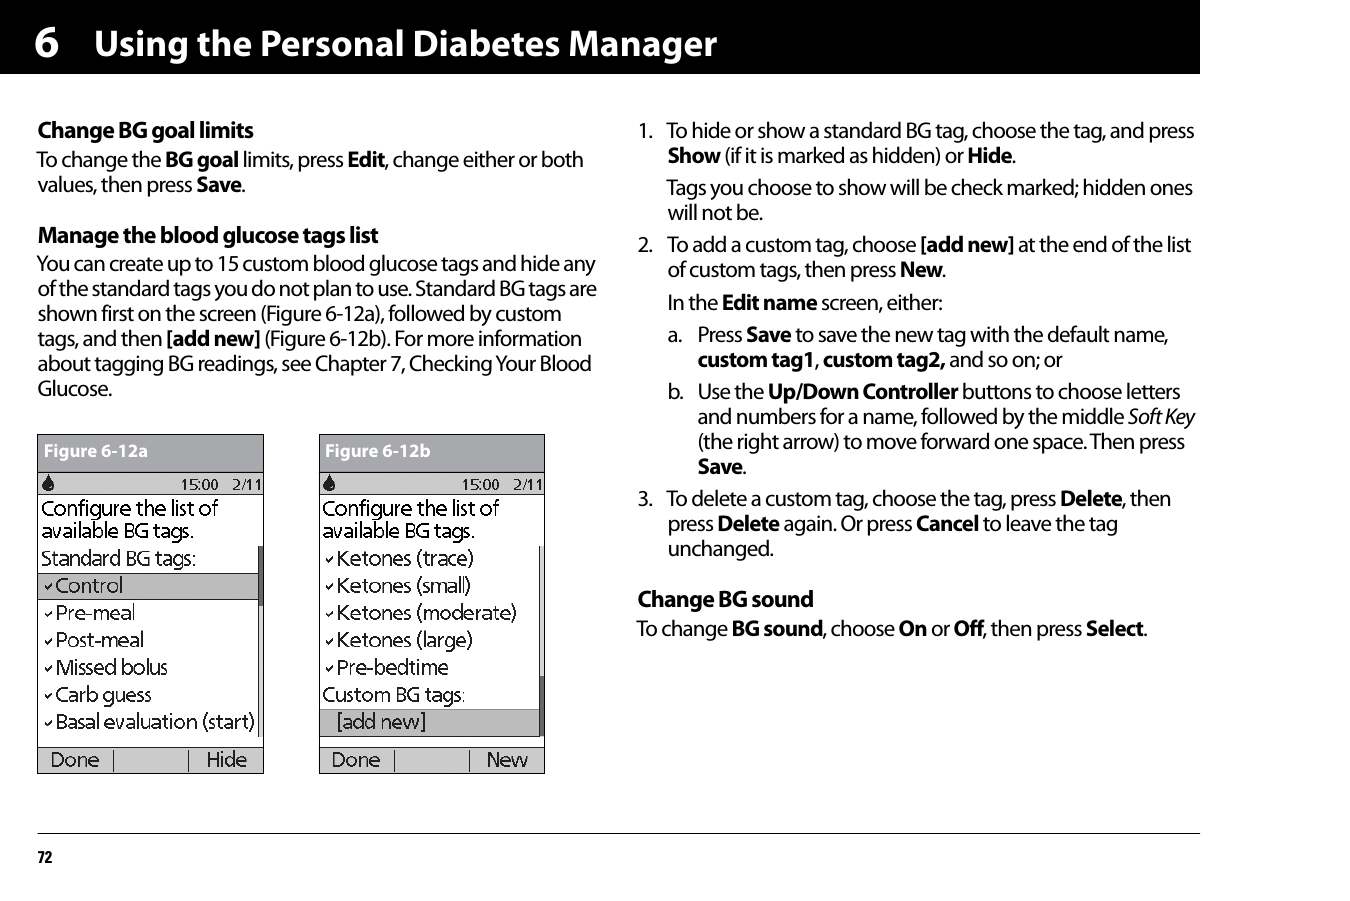 Using the Personal Diabetes Manager726Change BG goal limitsTo change the BG goal limits, press Edit, change either or both values, then press Save.Manage the blood glucose tags listYou can create up to 15 custom blood glucose tags and hide any of the standard tags you do not plan to use. Standard BG tags are shown first on the screen (Figure 6-12a), followed by custom tags, and then [add new] (Figure 6-12b). For more information about tagging BG readings, see Chapter 7, Checking Your Blood Glucose.1. To hide or show a standard BG tag, choose the tag, and press Show (if it is marked as hidden) or Hide.Tags you choose to show will be check marked; hidden ones will not be.2. To add a custom tag, choose [add new] at the end of the list of custom tags, then press New. In the Edit name screen, either:a. Press Save to save the new tag with the default name, custom tag1, custom tag2, and so on; orb. Use the Up/Down Controller buttons to choose letters and numbers for a name, followed by the middle Soft Key (the right arrow) to move forward one space. Then press Save.3. To delete a custom tag, choose the tag, press Delete, then press Delete again. Or press Cancel to leave the tag unchanged.Change BG soundTo change BG sound, choose On or Off, then press Select.Figure 6-12a Figure 6-12b